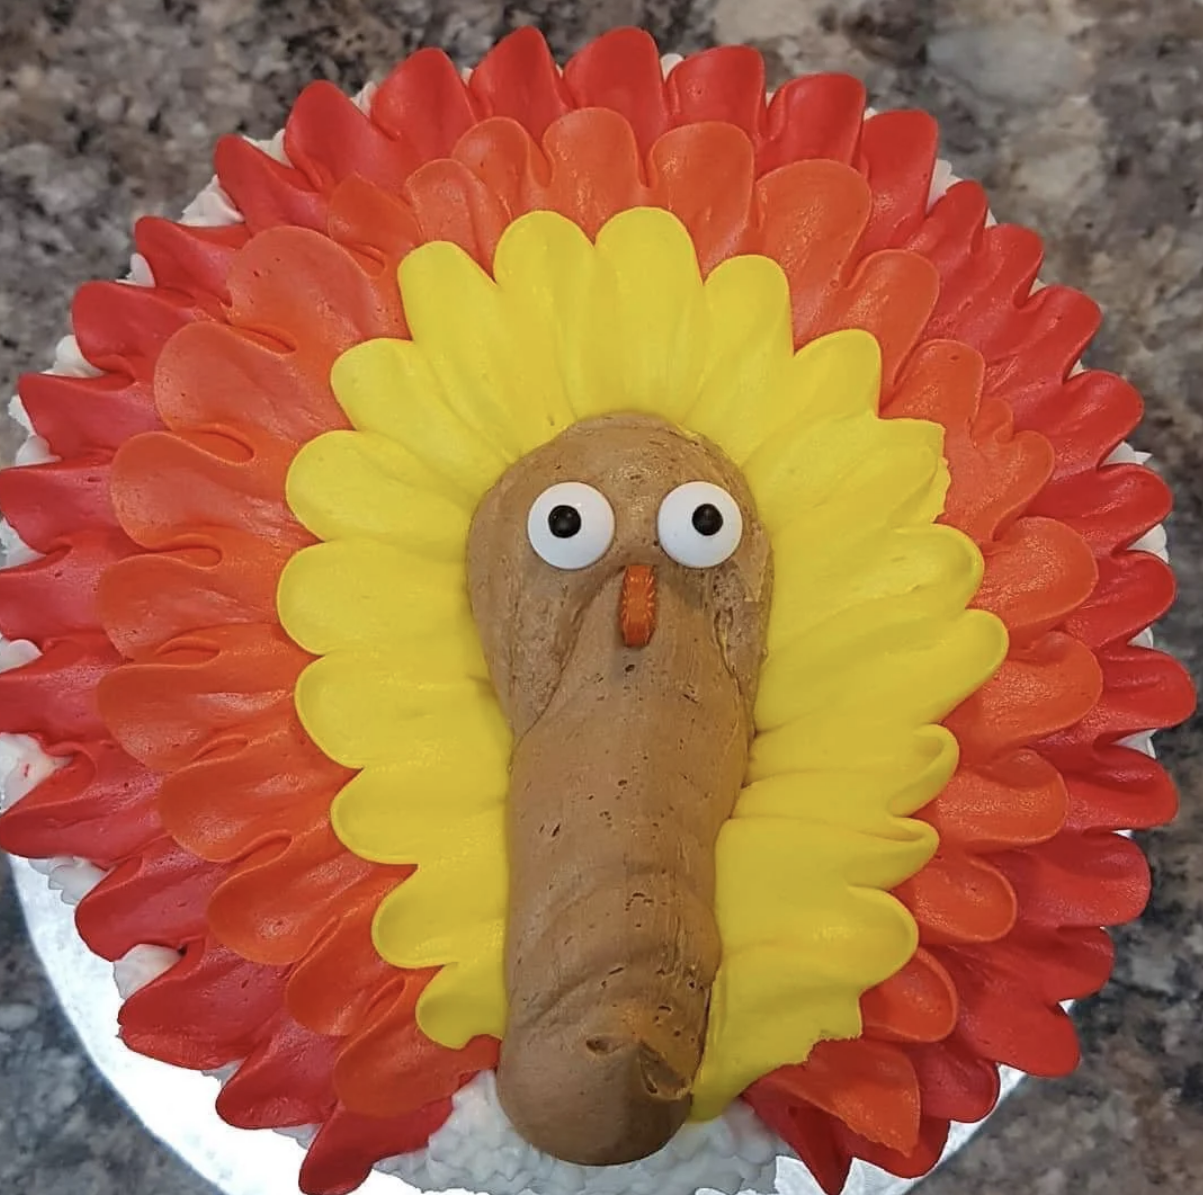 turkey made of icing that can either look like poop or a penis